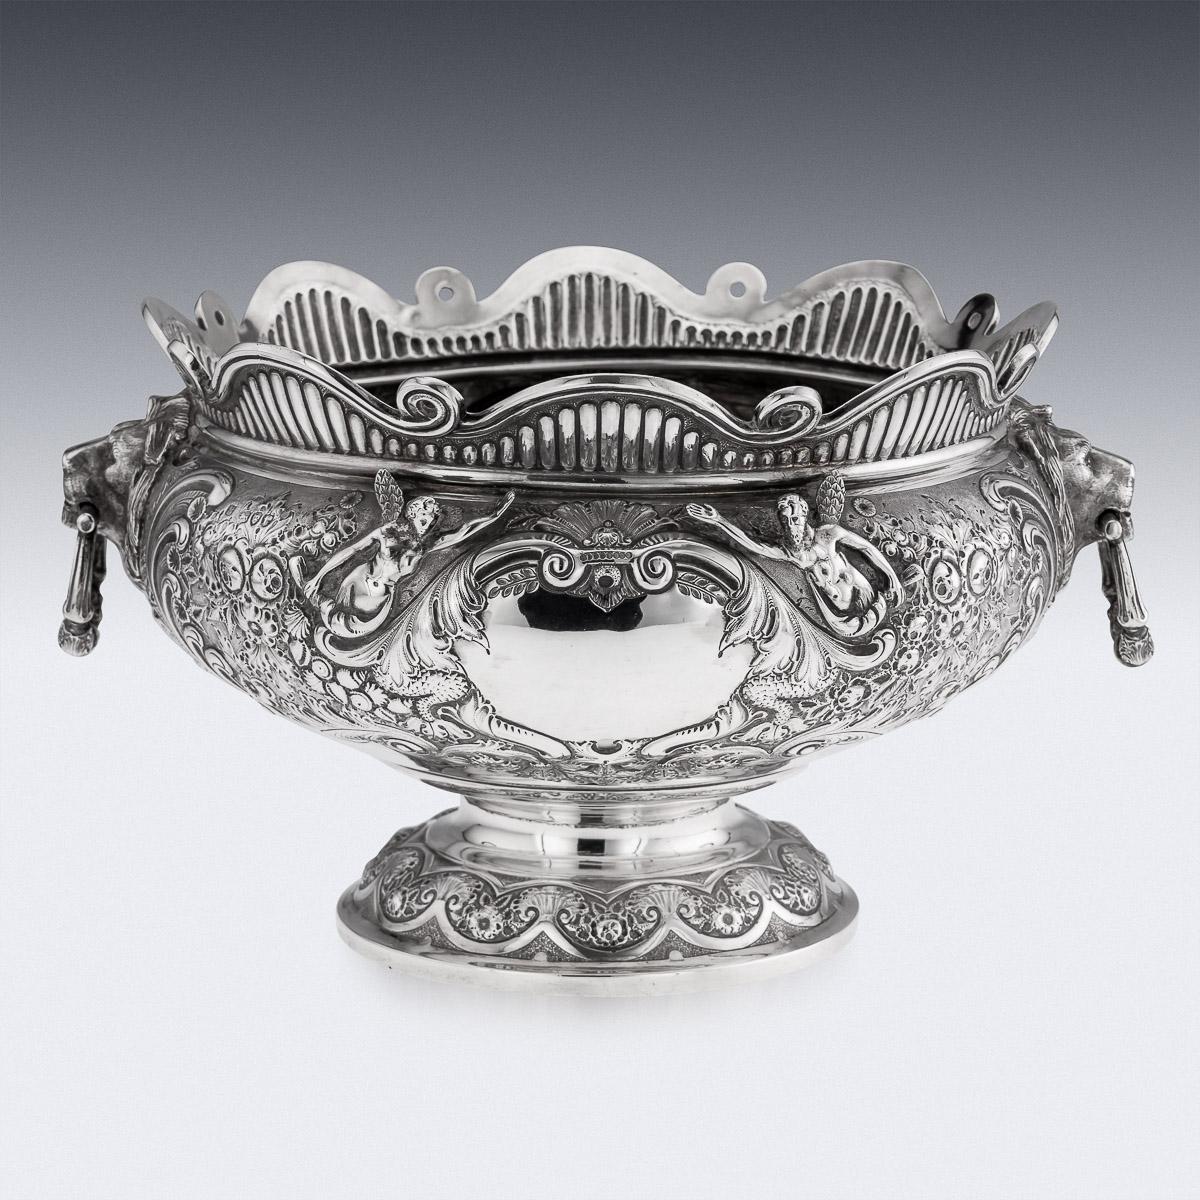 Antique 19th Century Victorian Solid Silver Armada Bowl, London c.1890 In Good Condition For Sale In Royal Tunbridge Wells, Kent